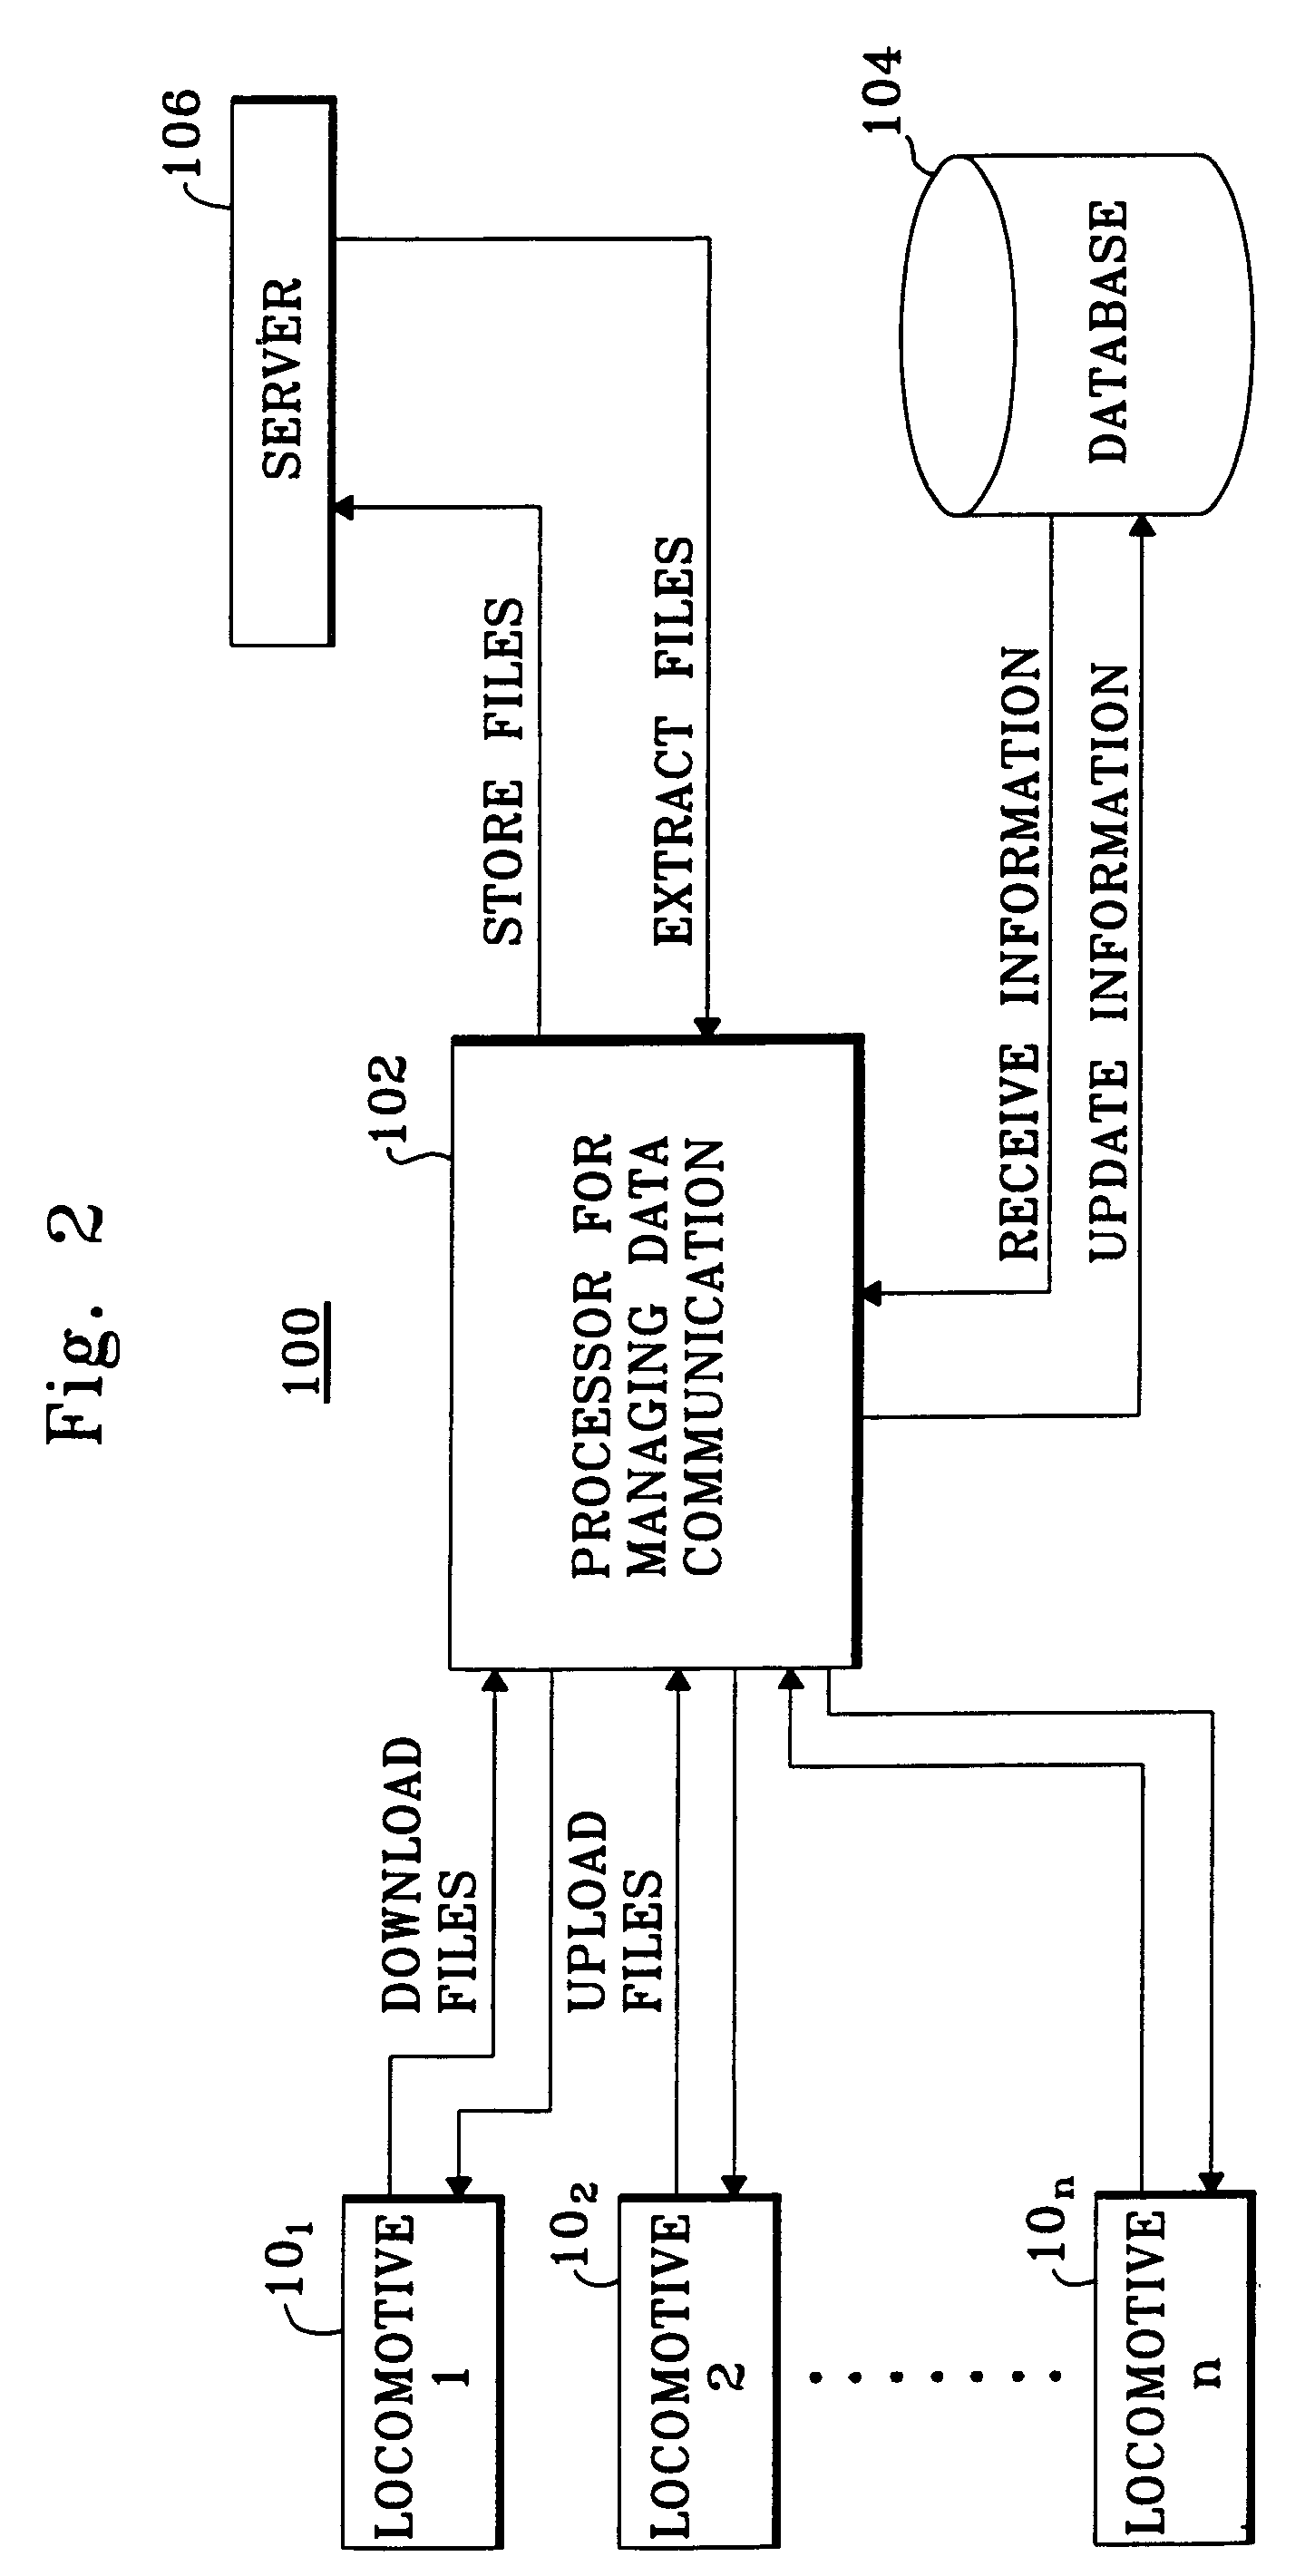 Method and system for remotely managing communication of data used for predicting malfunctions in a plurality of machines